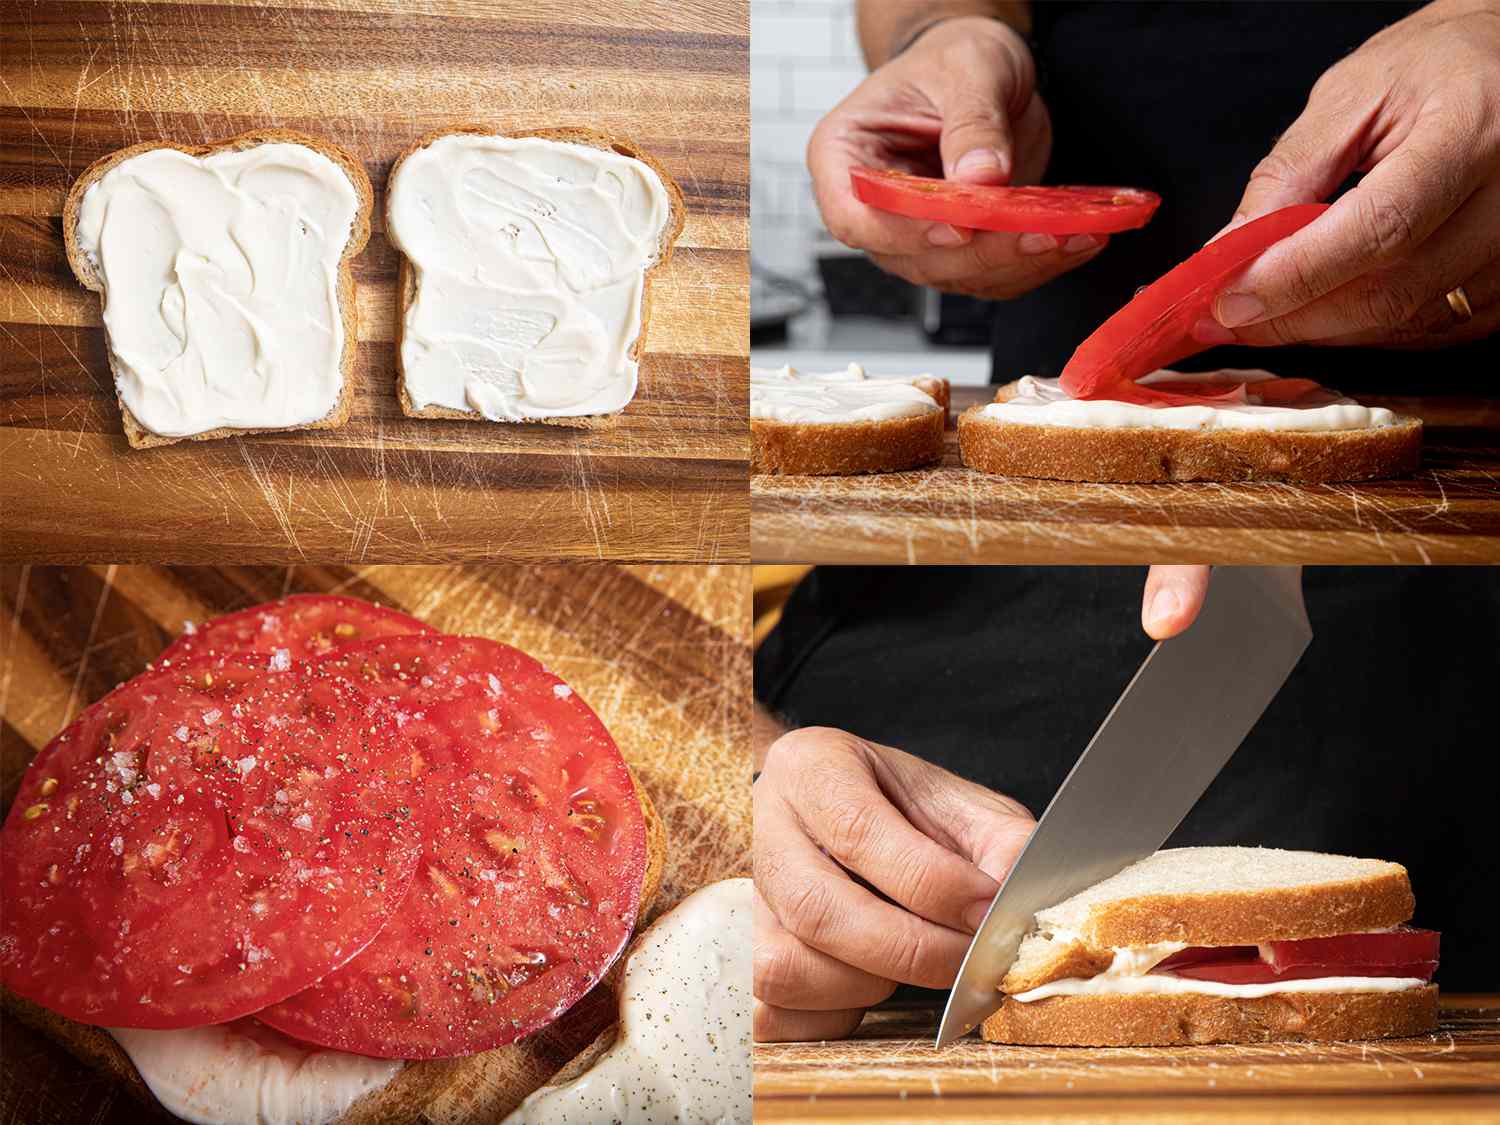 Four Image Collage. Top Left: two pieces of bread covered in mayo. Top Right: Two hands placing tomatoes on bread, viewed from the side. Bottom left: close up of tomatoes with salt and pepper. Bottom Right: Side view of tomato sandwich being cut on the diagonal